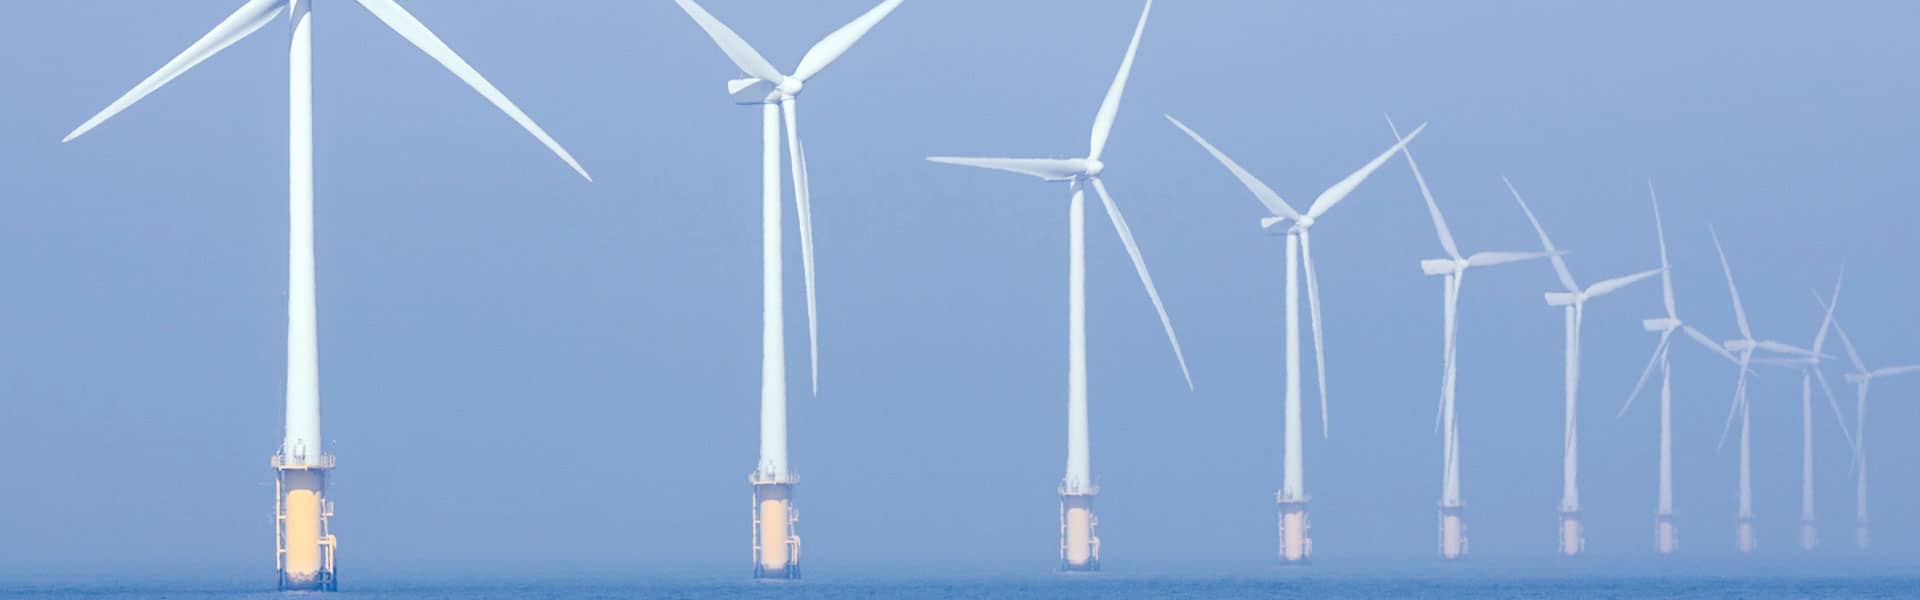 offshore windfarm with 8 3-blade turbines shown